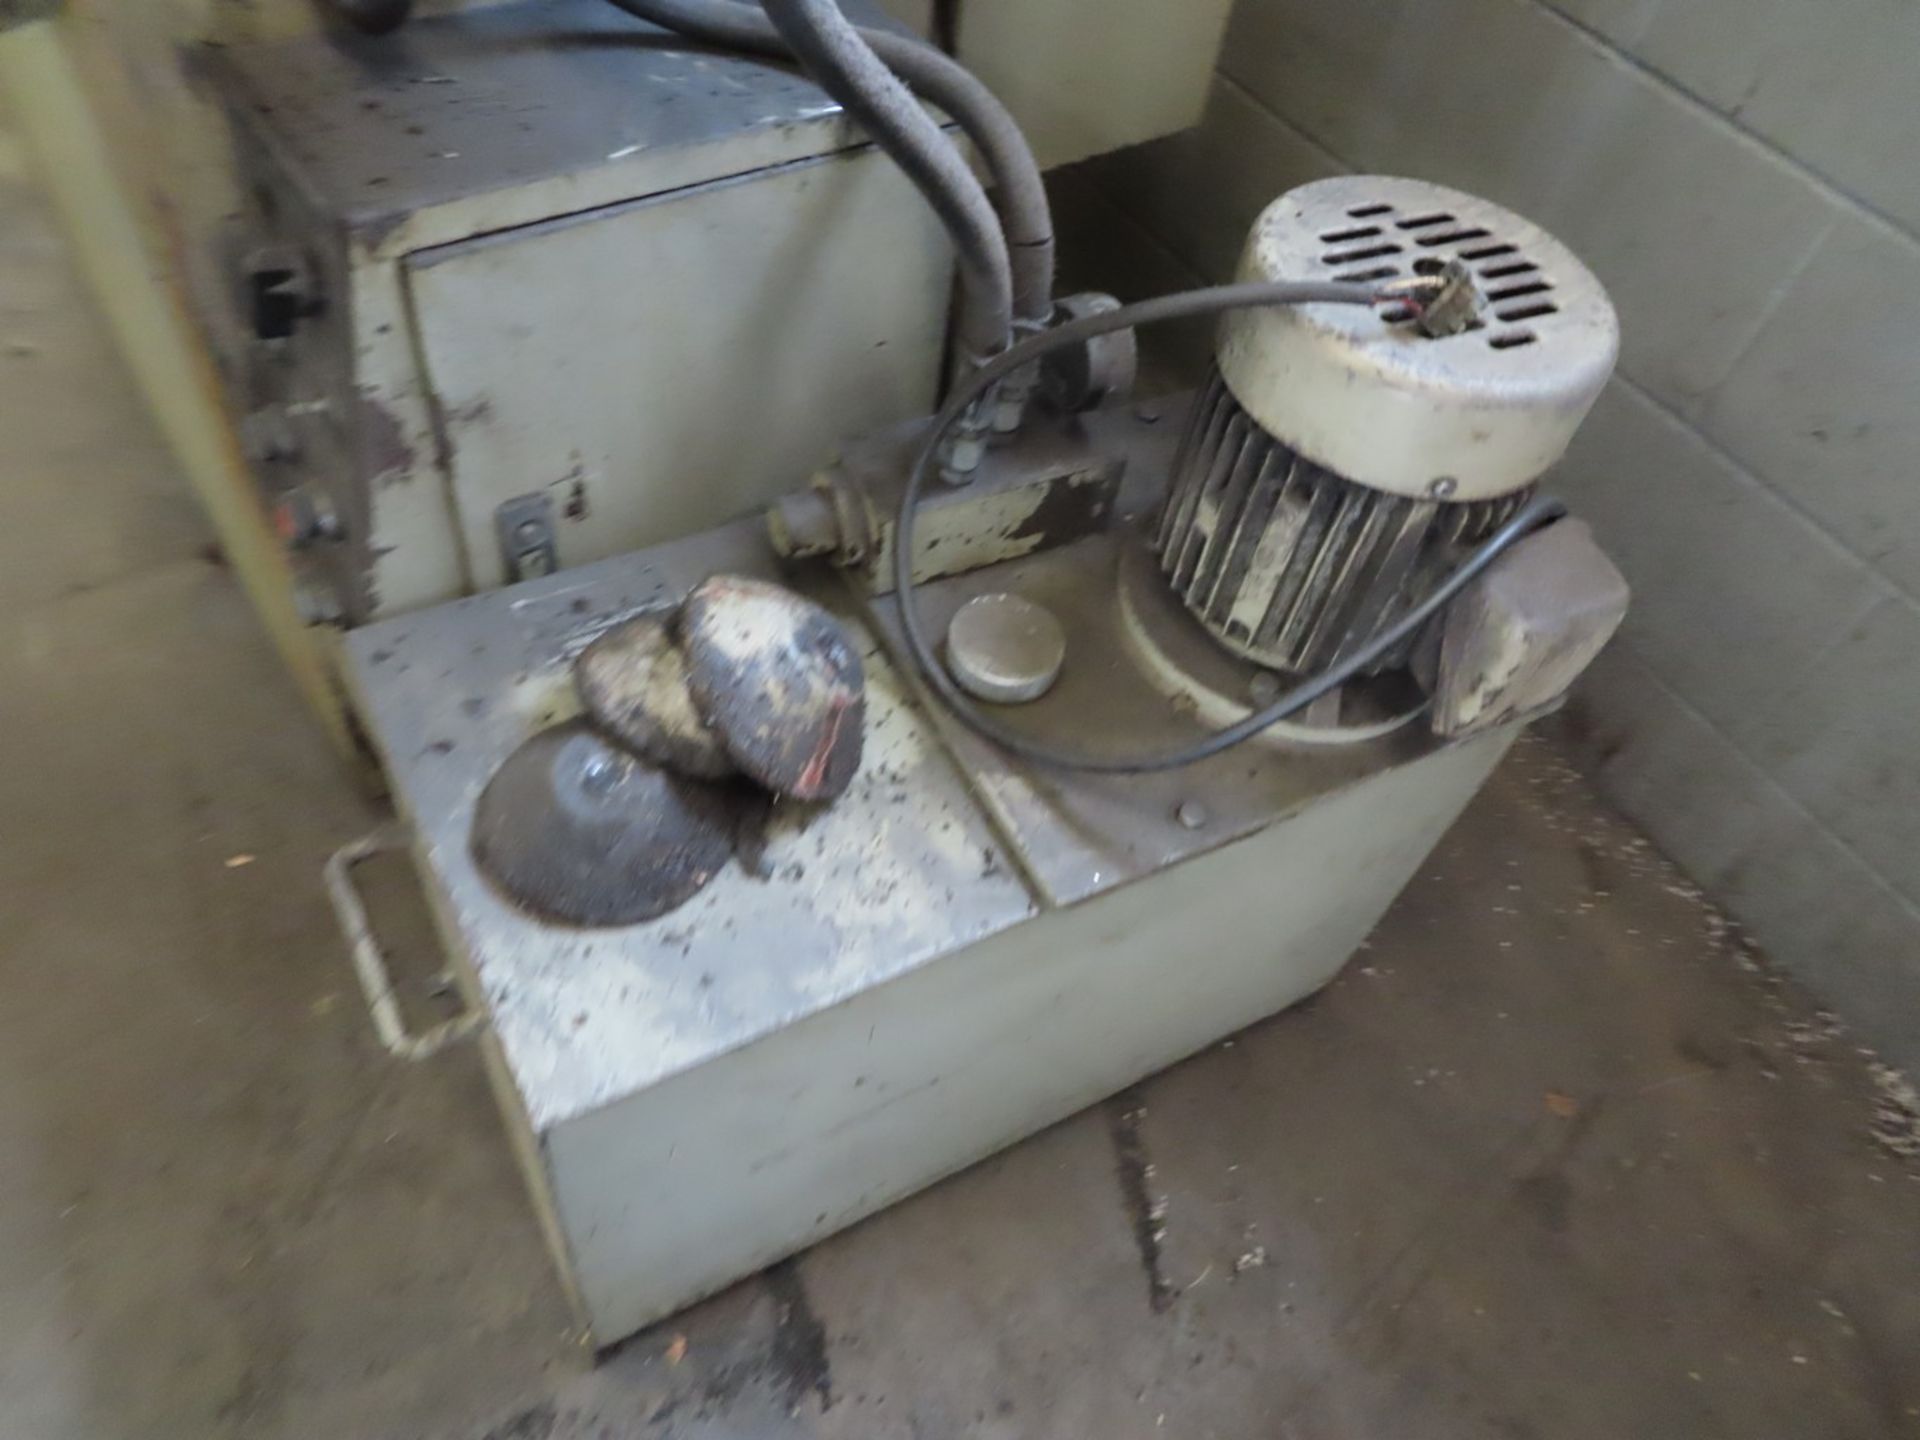 1979 Max-O KGS-250AH Auto Feed Surface Grinder - Image 3 of 5